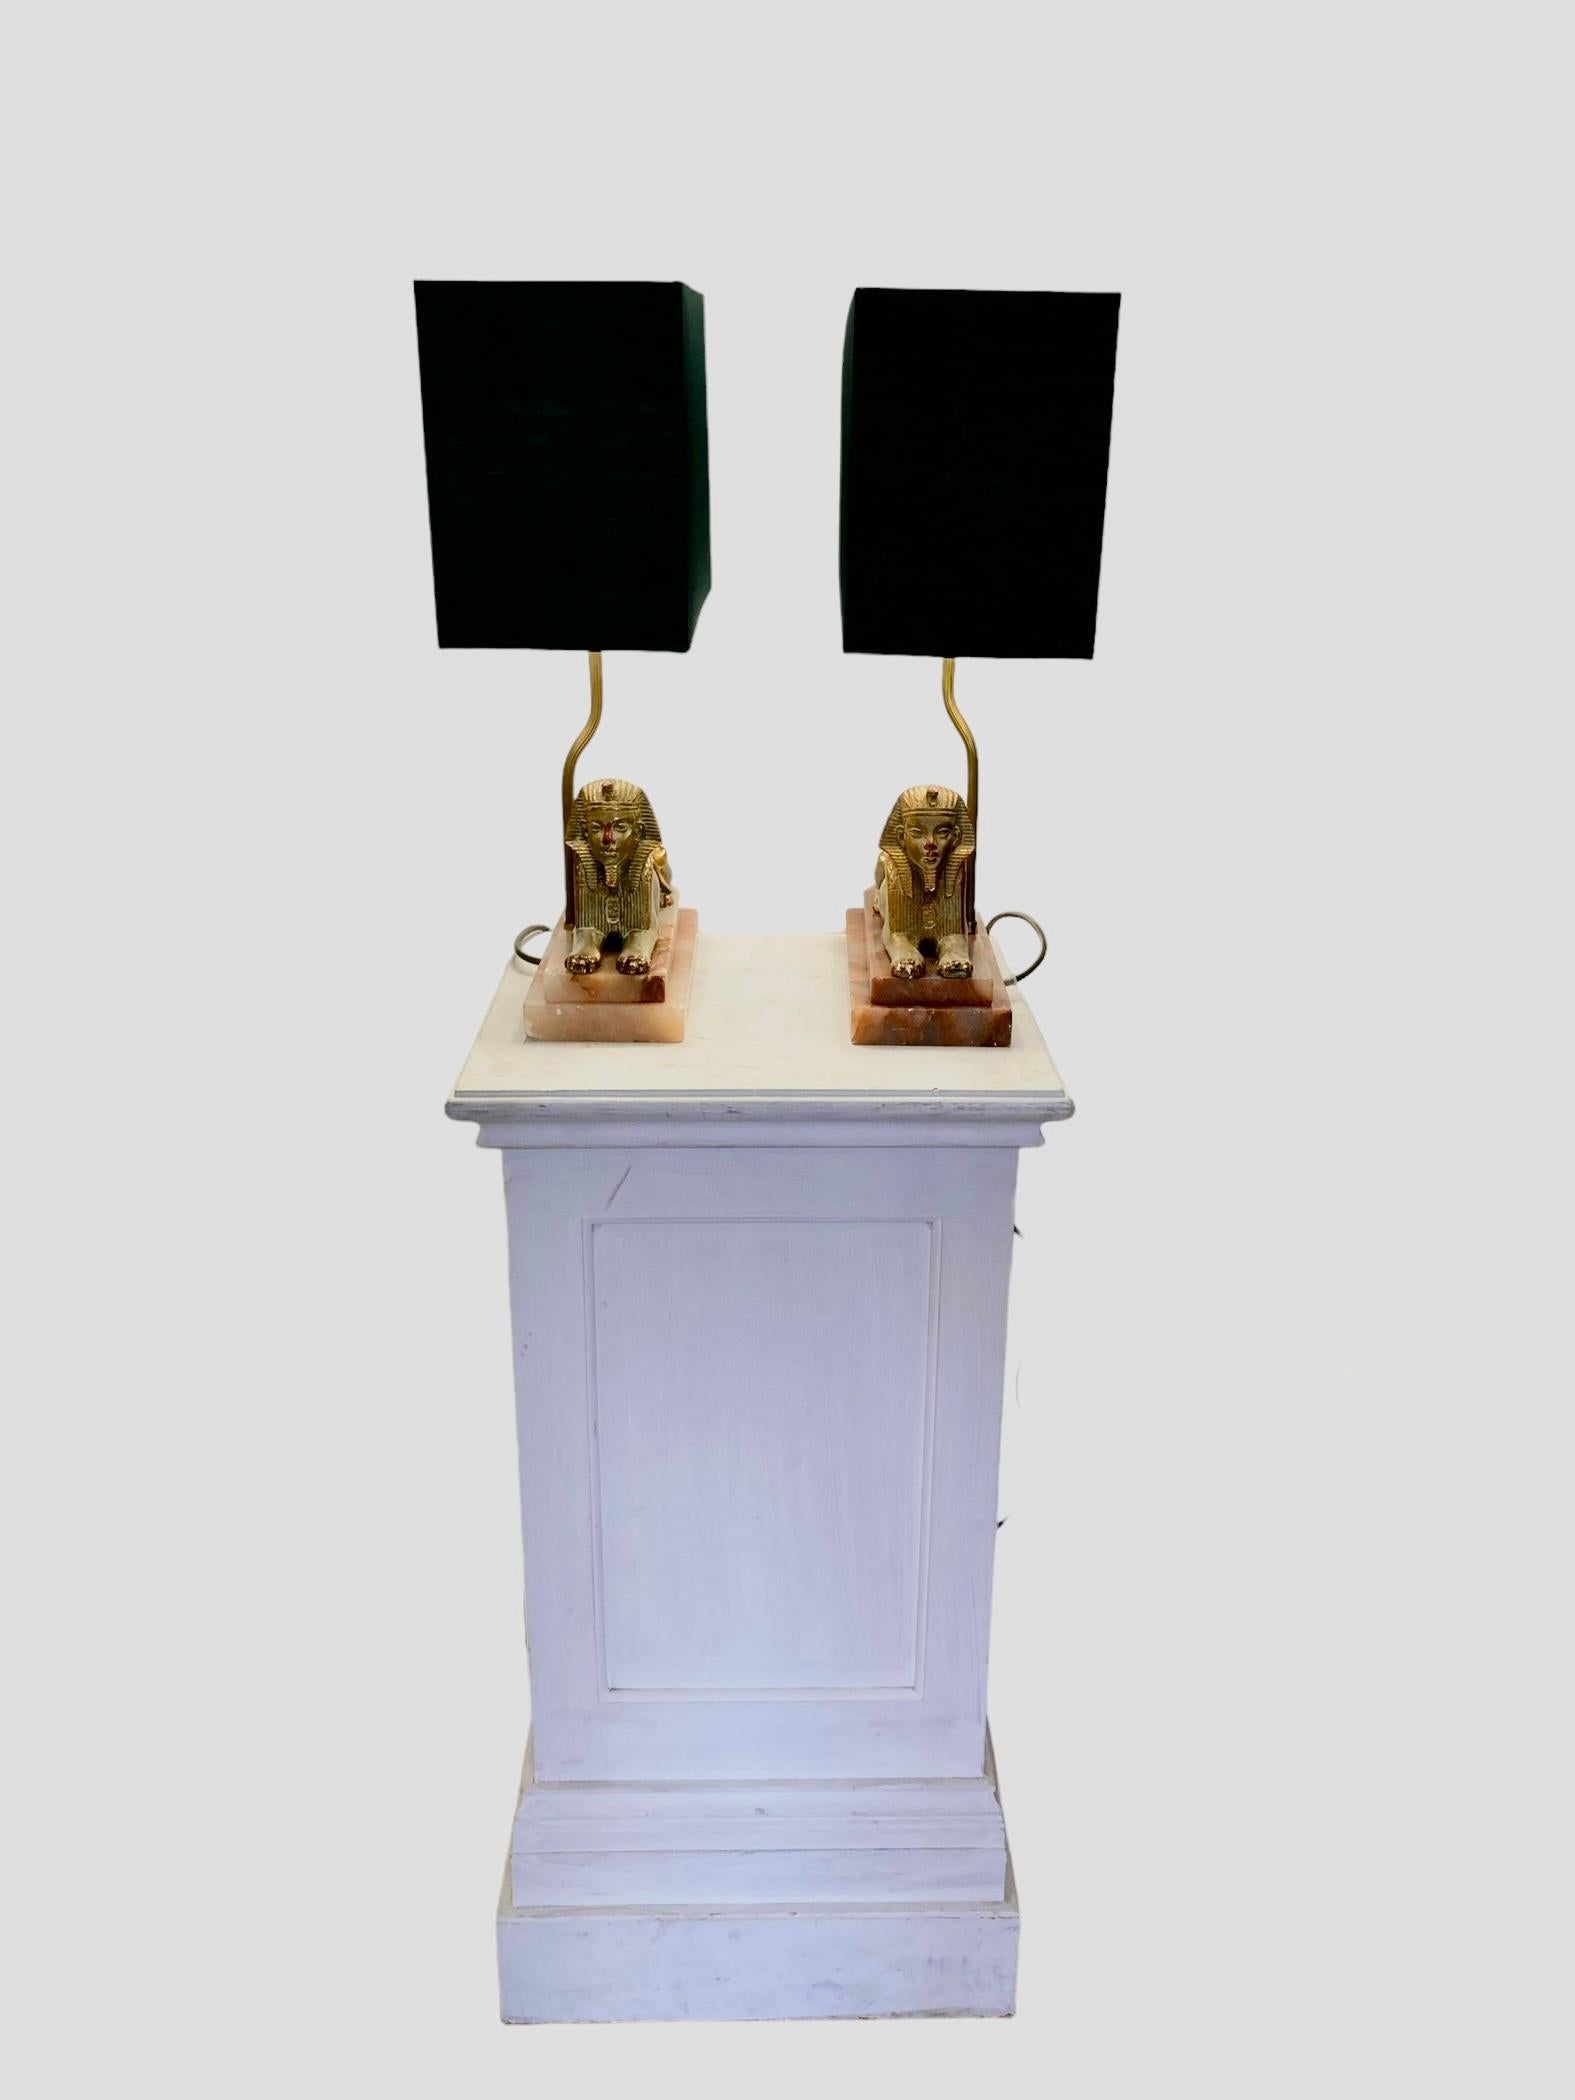 20th Century A Pair of Art Deco Egytian Sphinx Table Lamps on a Marble Base Dark Green Shades For Sale